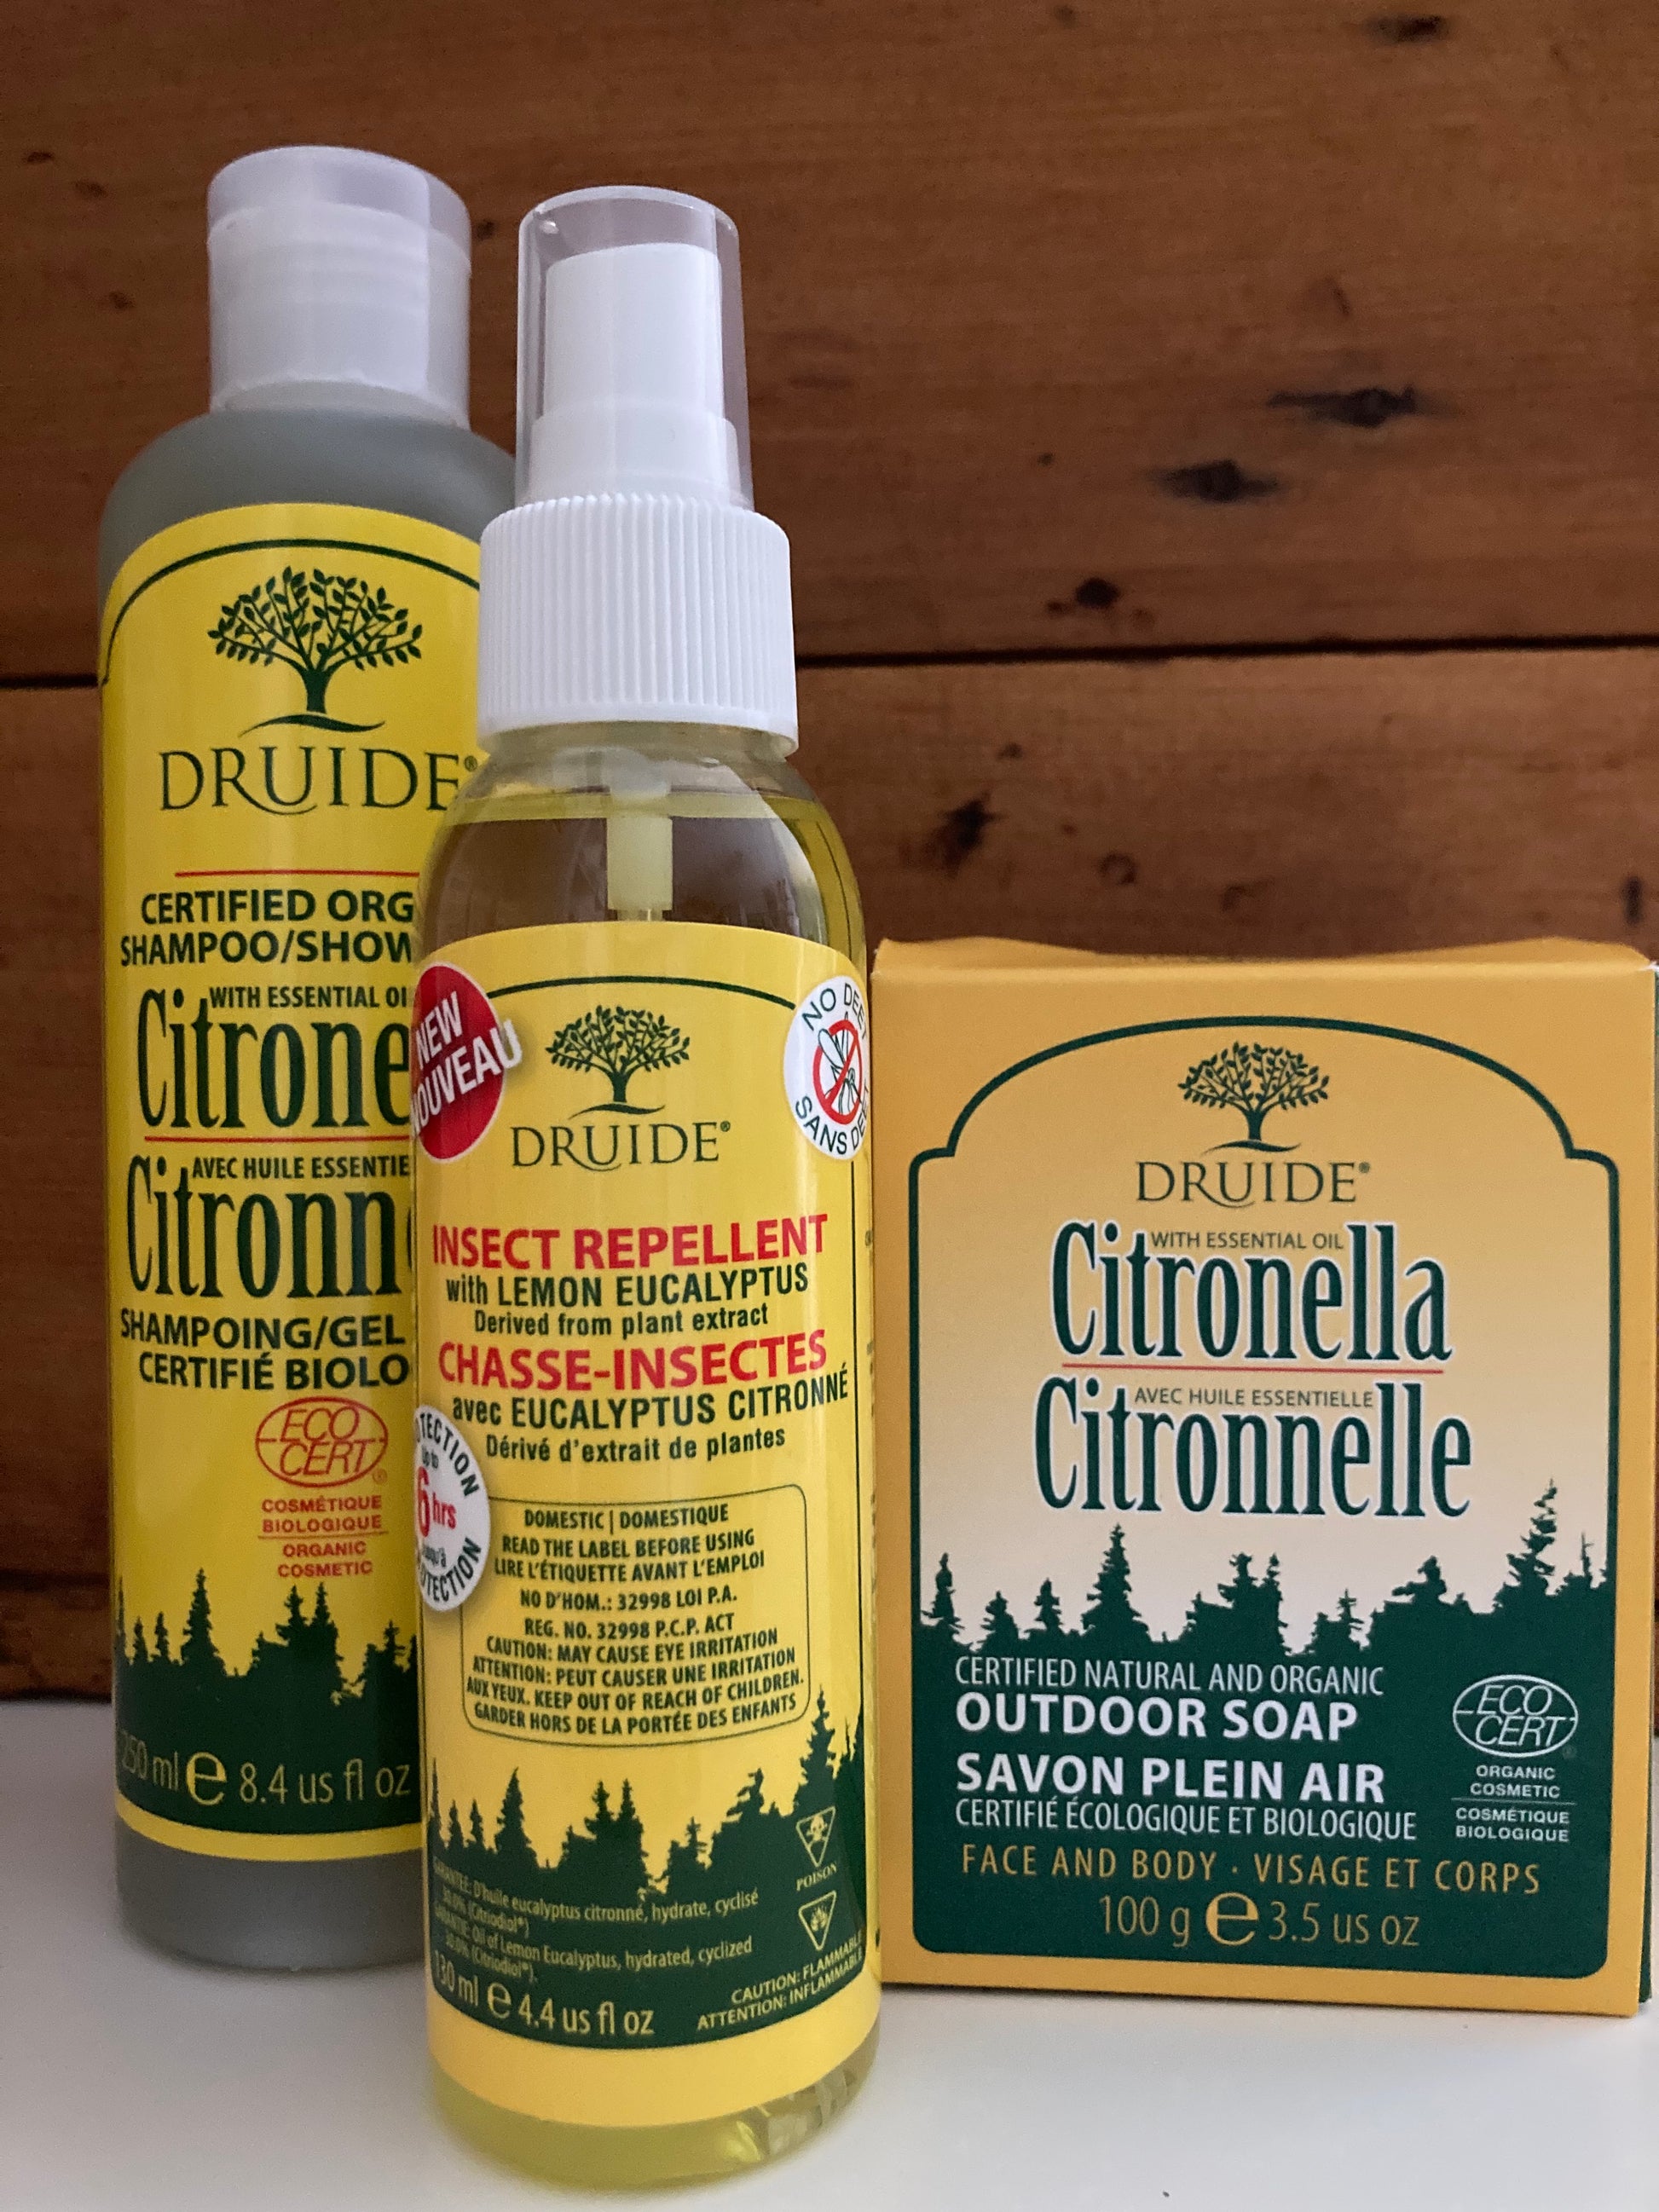 Holistic by Druide - CITRONELLA INSECT REPELLENTNEW! 2 sizes!